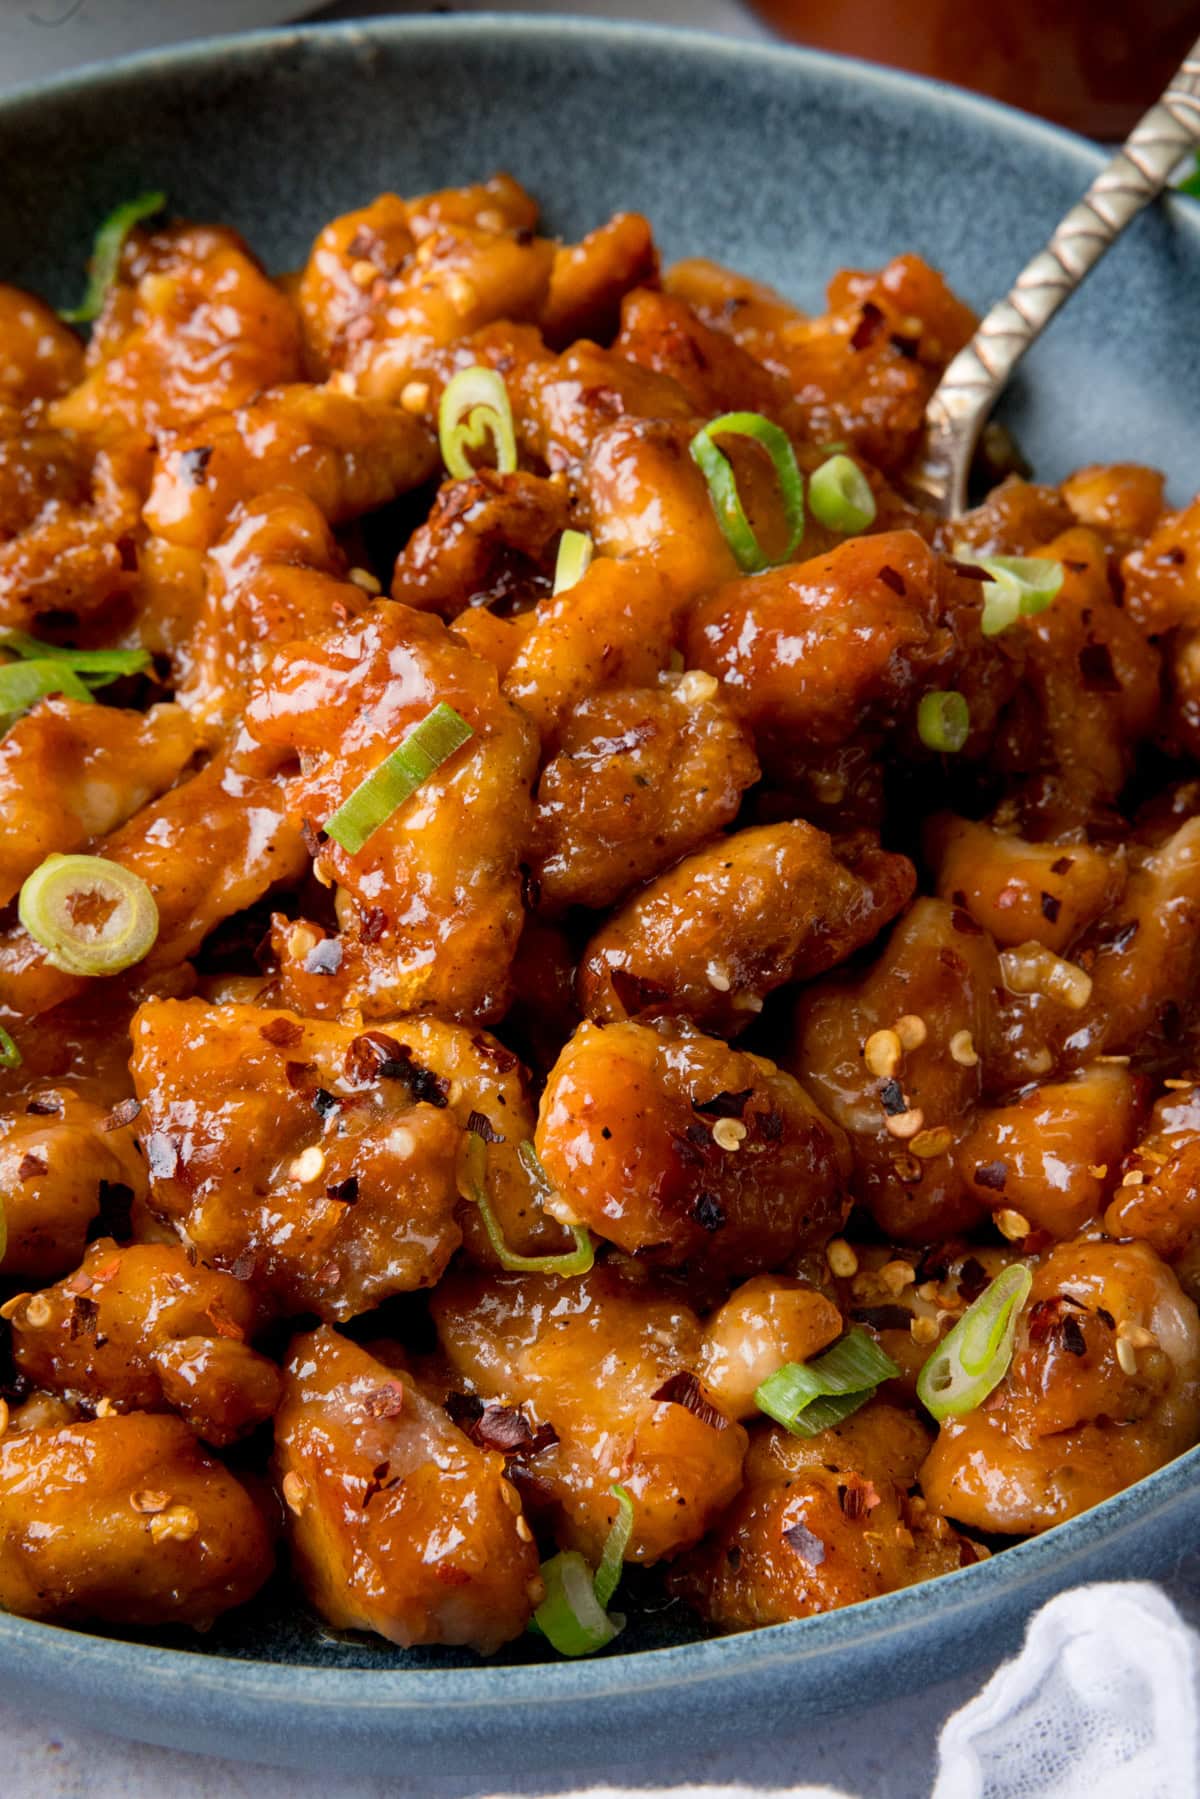 A tall, closeup shot of Baked Honey Garlic Chicken. The picture is of a blue bowl filled with chicken, which fills the image. The chicken is topped with chopped spring onion and dried chilli flakes. There is a silver spoon sticking out of the right of the bowl. In the bottom right corner, you can slightly see the edge of a white napkin.